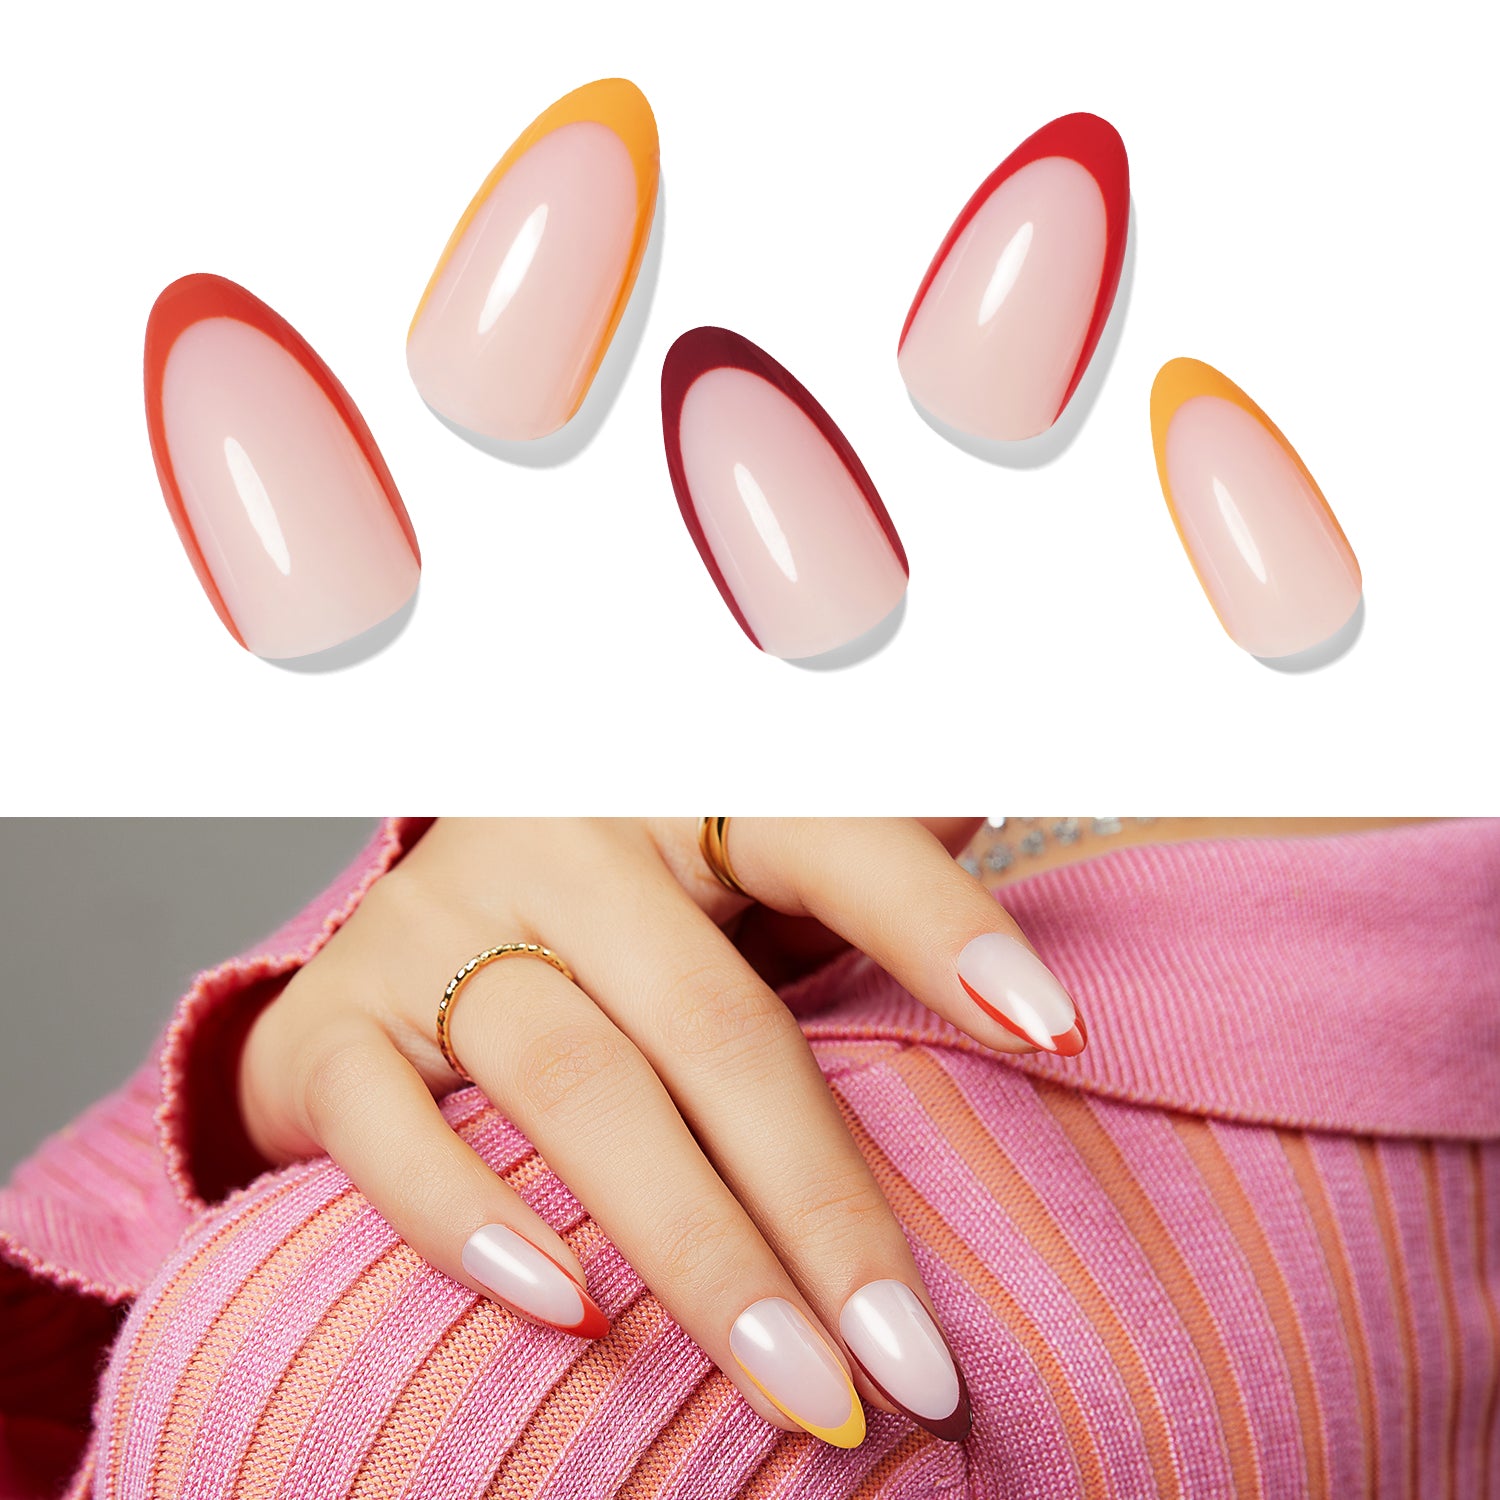 Buy COSLIFESTORE- Press on nails-24 reusable gel nail extensions shape long  Ballerina OMBRE LIGHT PINK french nails with full application kit - buffer,  manicure tool, 24 jelly tabs nail glue- DIY nail